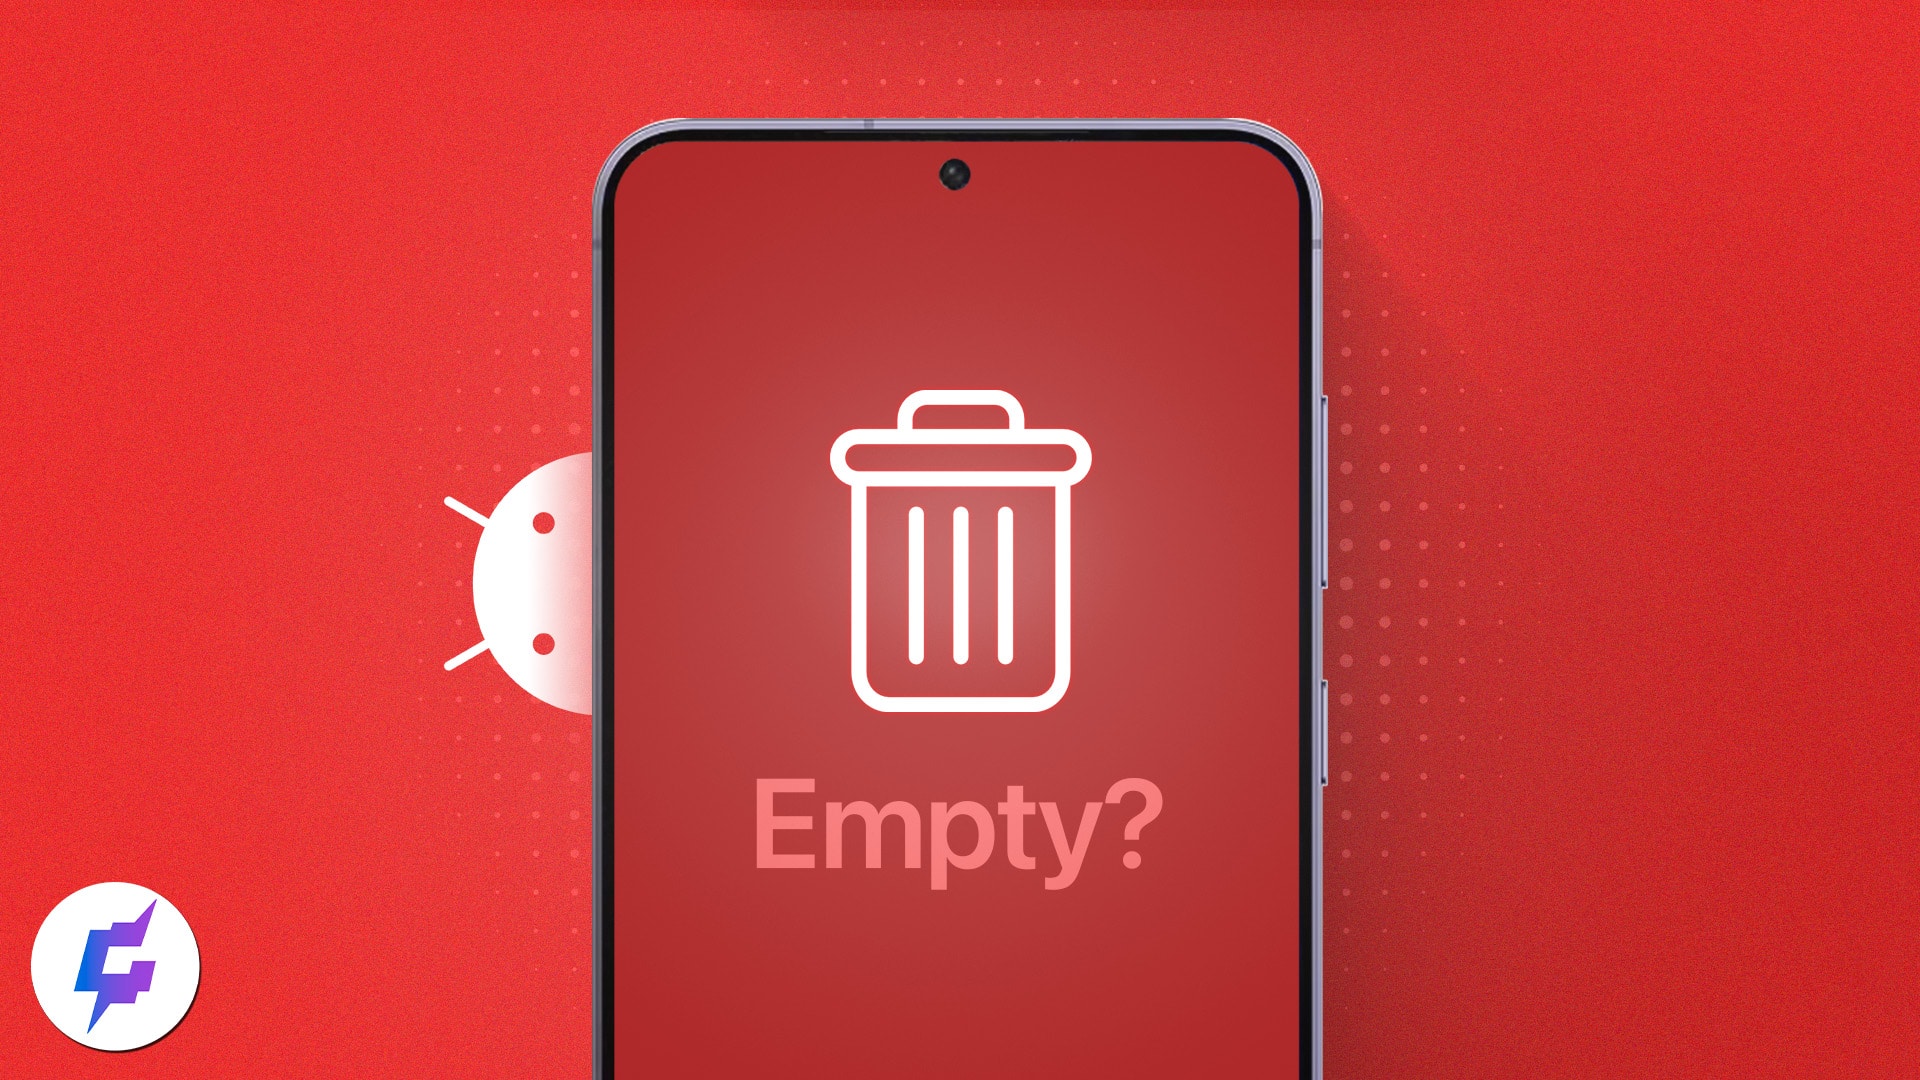 How to empty trash on Android